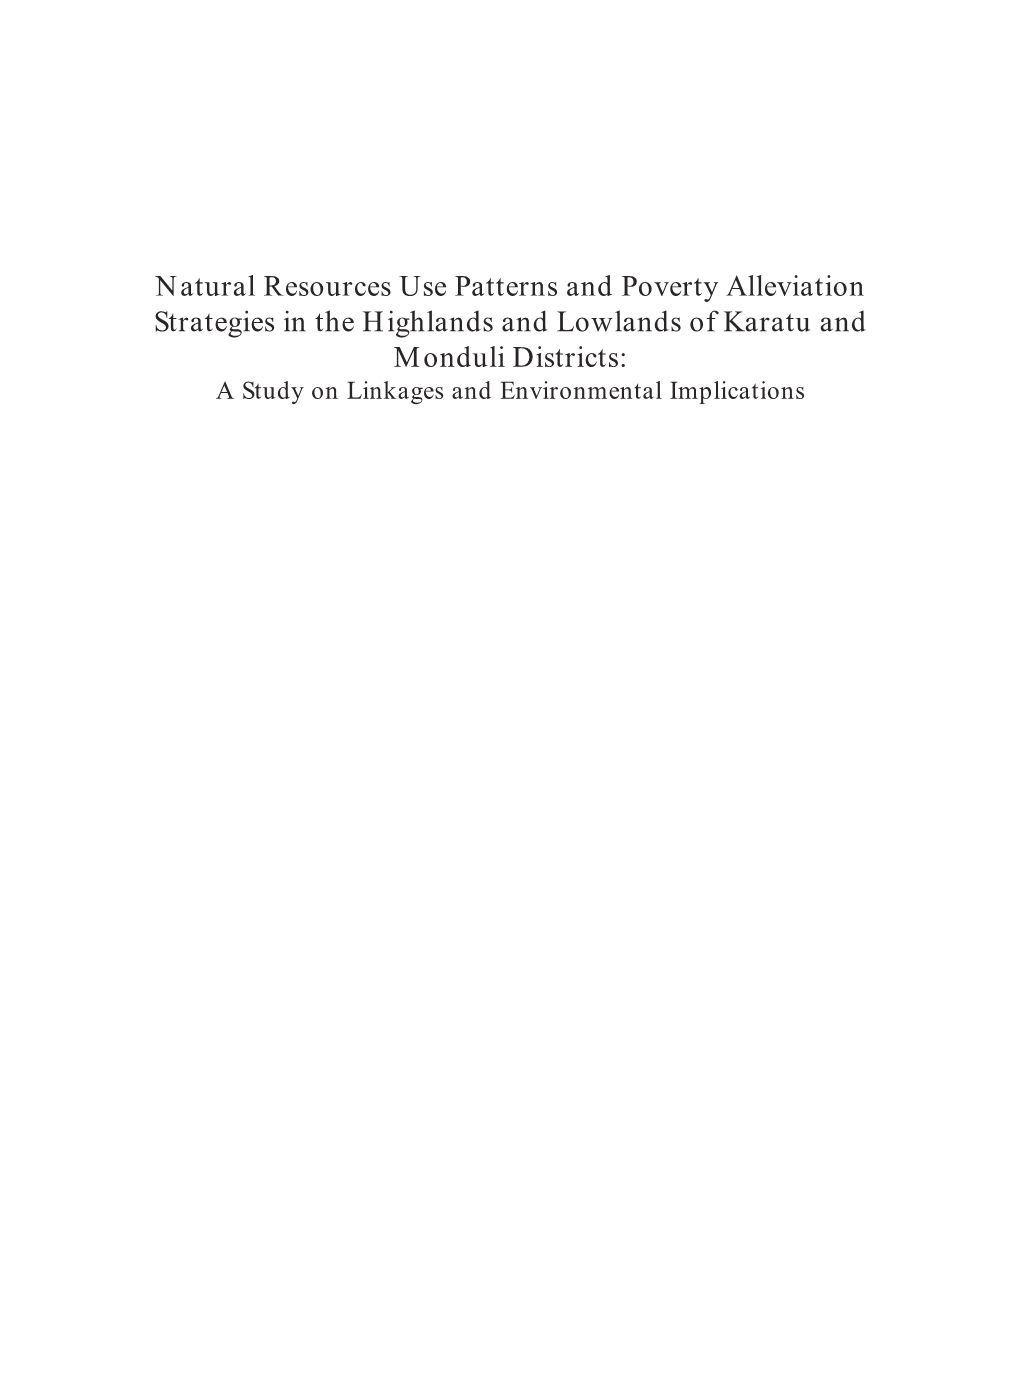 Natural Resources Use Patterns and Poverty Alleviation